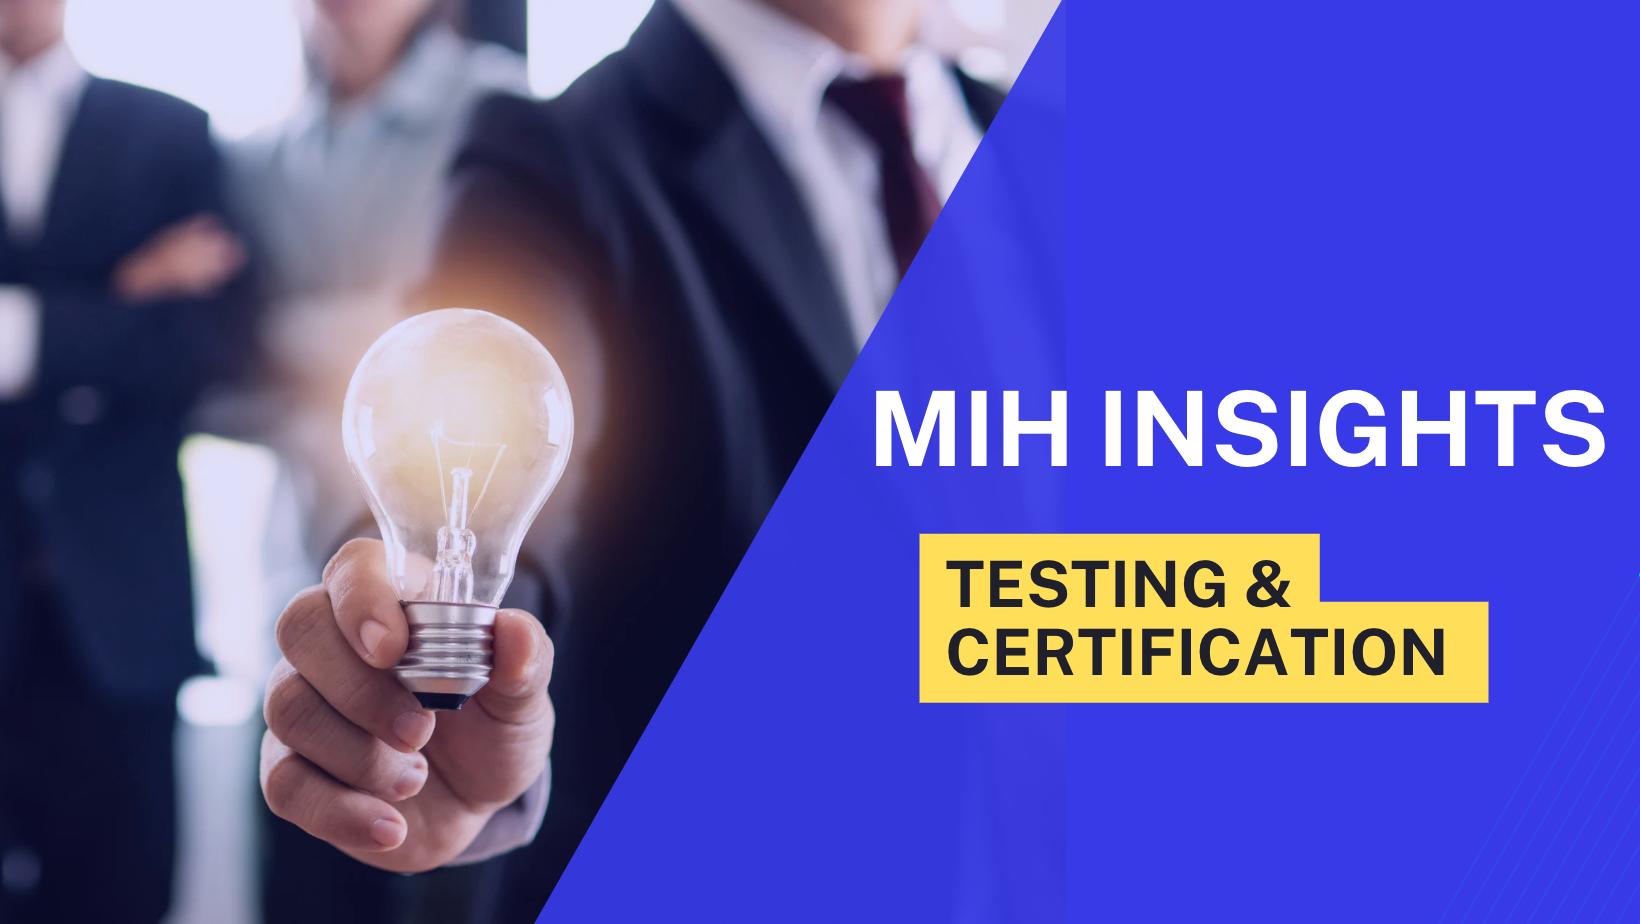 [MIH Insights] Testing and certification are the cornerstones of EV; MIH never compromises on safety!